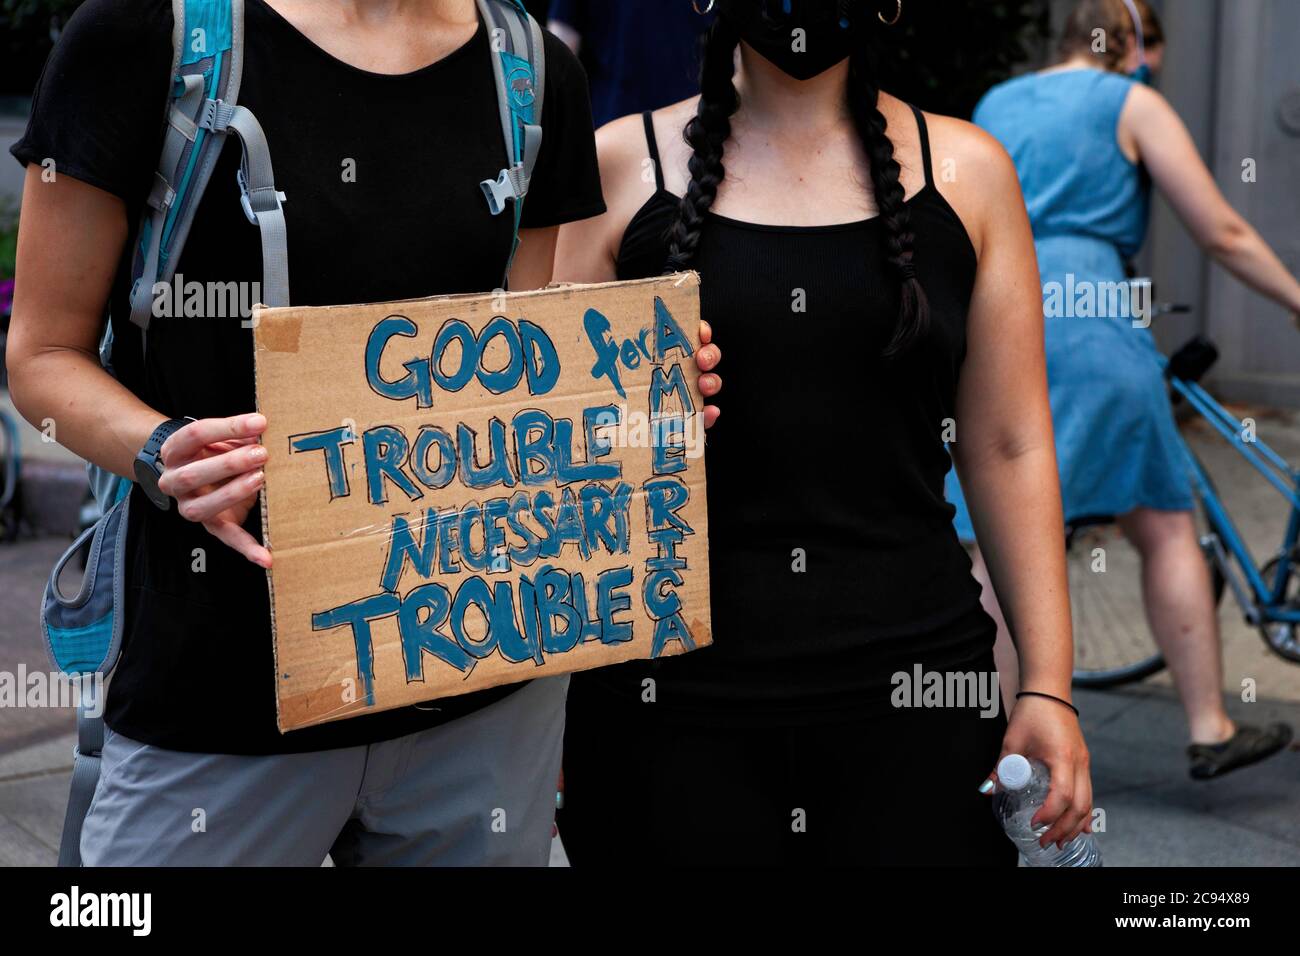 A sign quoting Congressman John Lewis: 'Good trouble, necessary trouble' at the March Against Trump's Police State, Washington, DC, United States Stock Photo